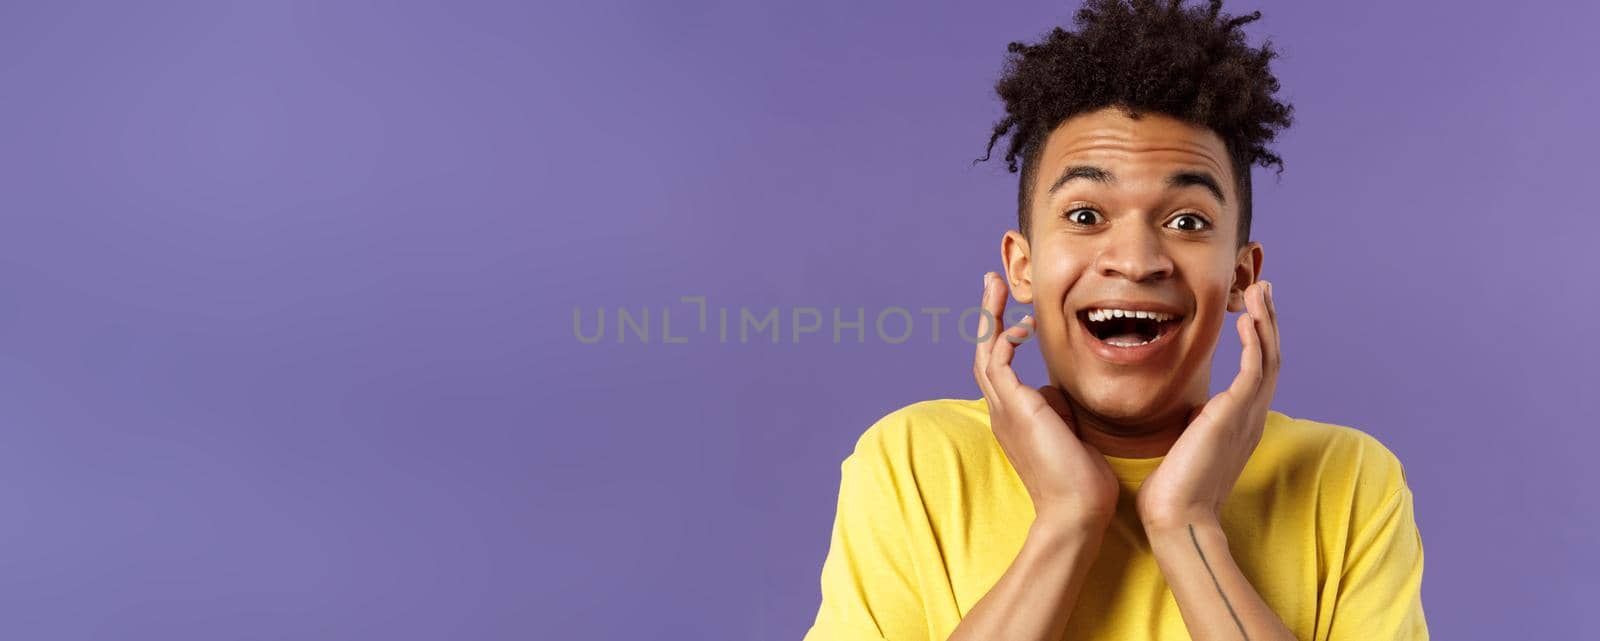 Close-up portrait of extremely happy, enthusiastic young man hear fantastic news, looking surprised and excited, touching face in joy, smiling upbeat look camera astonished, purple background.